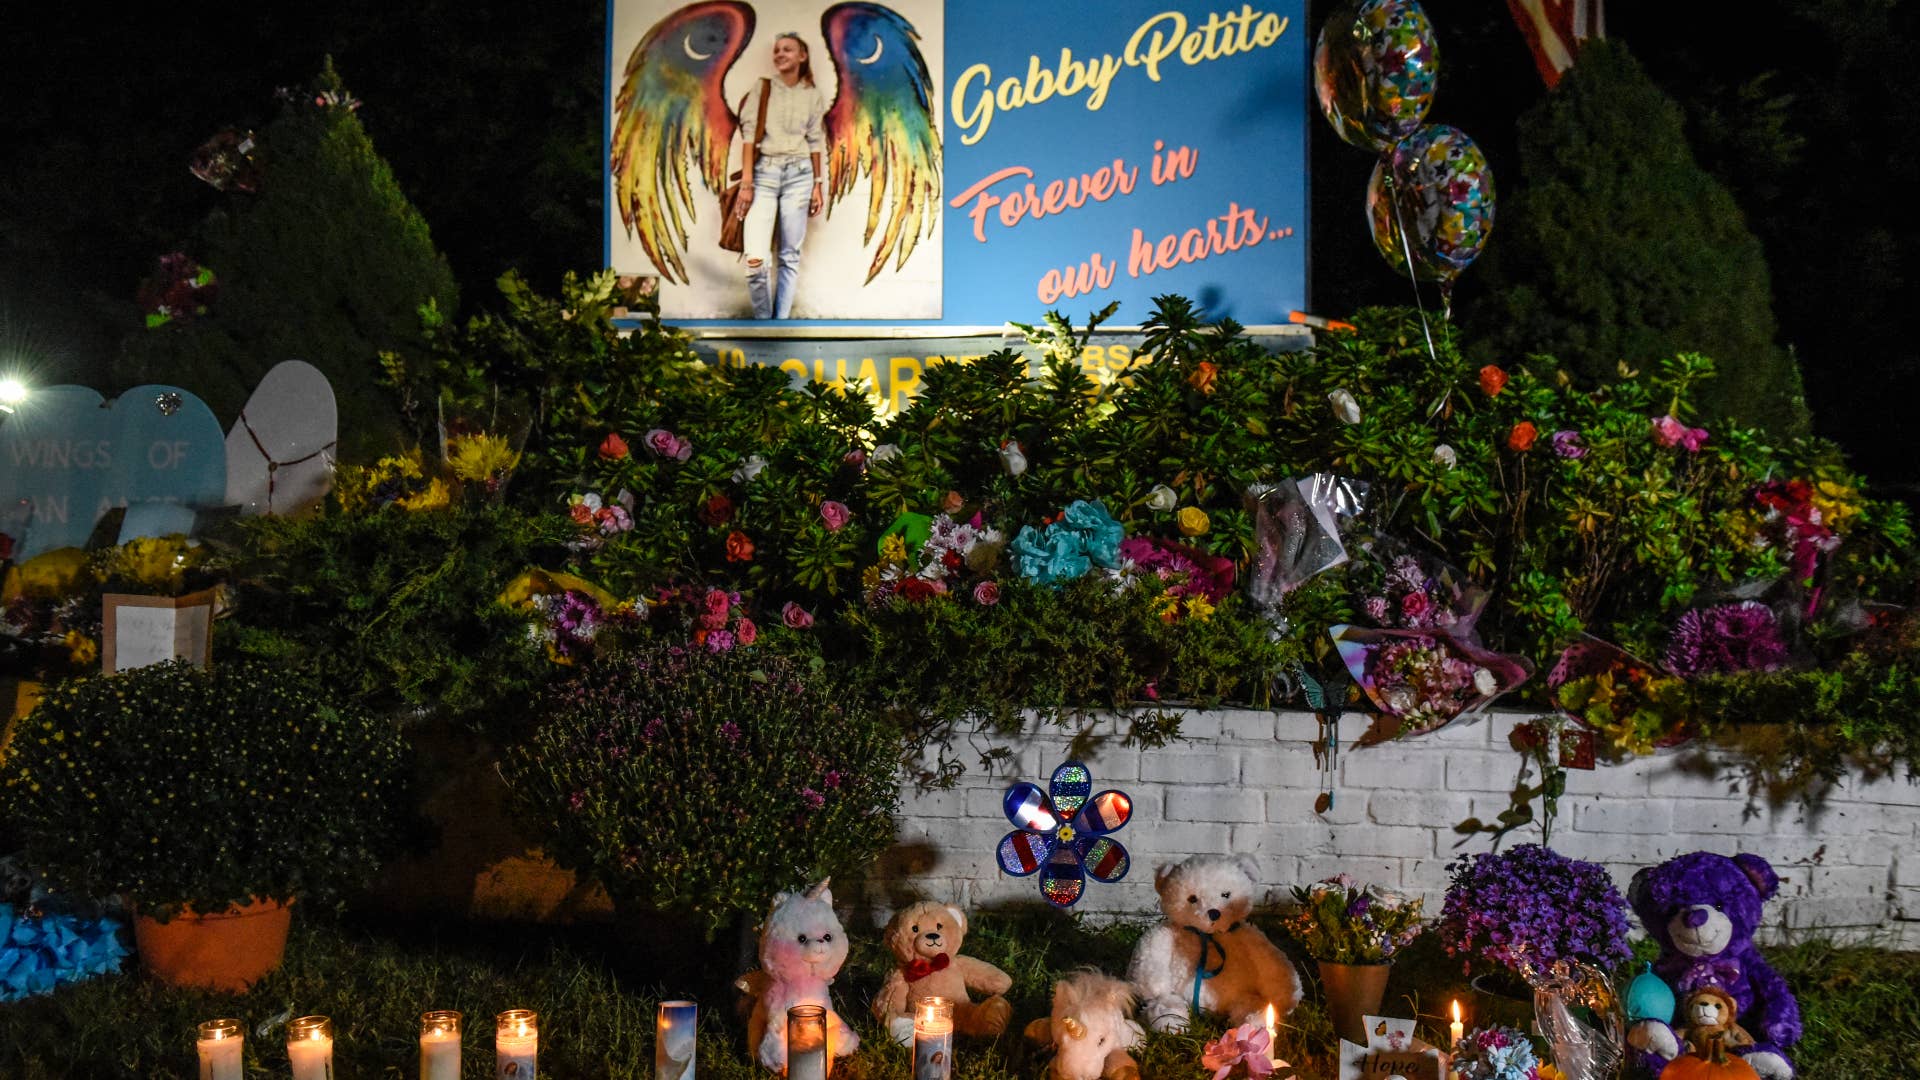 Gabby Petito memorial is pictured outside